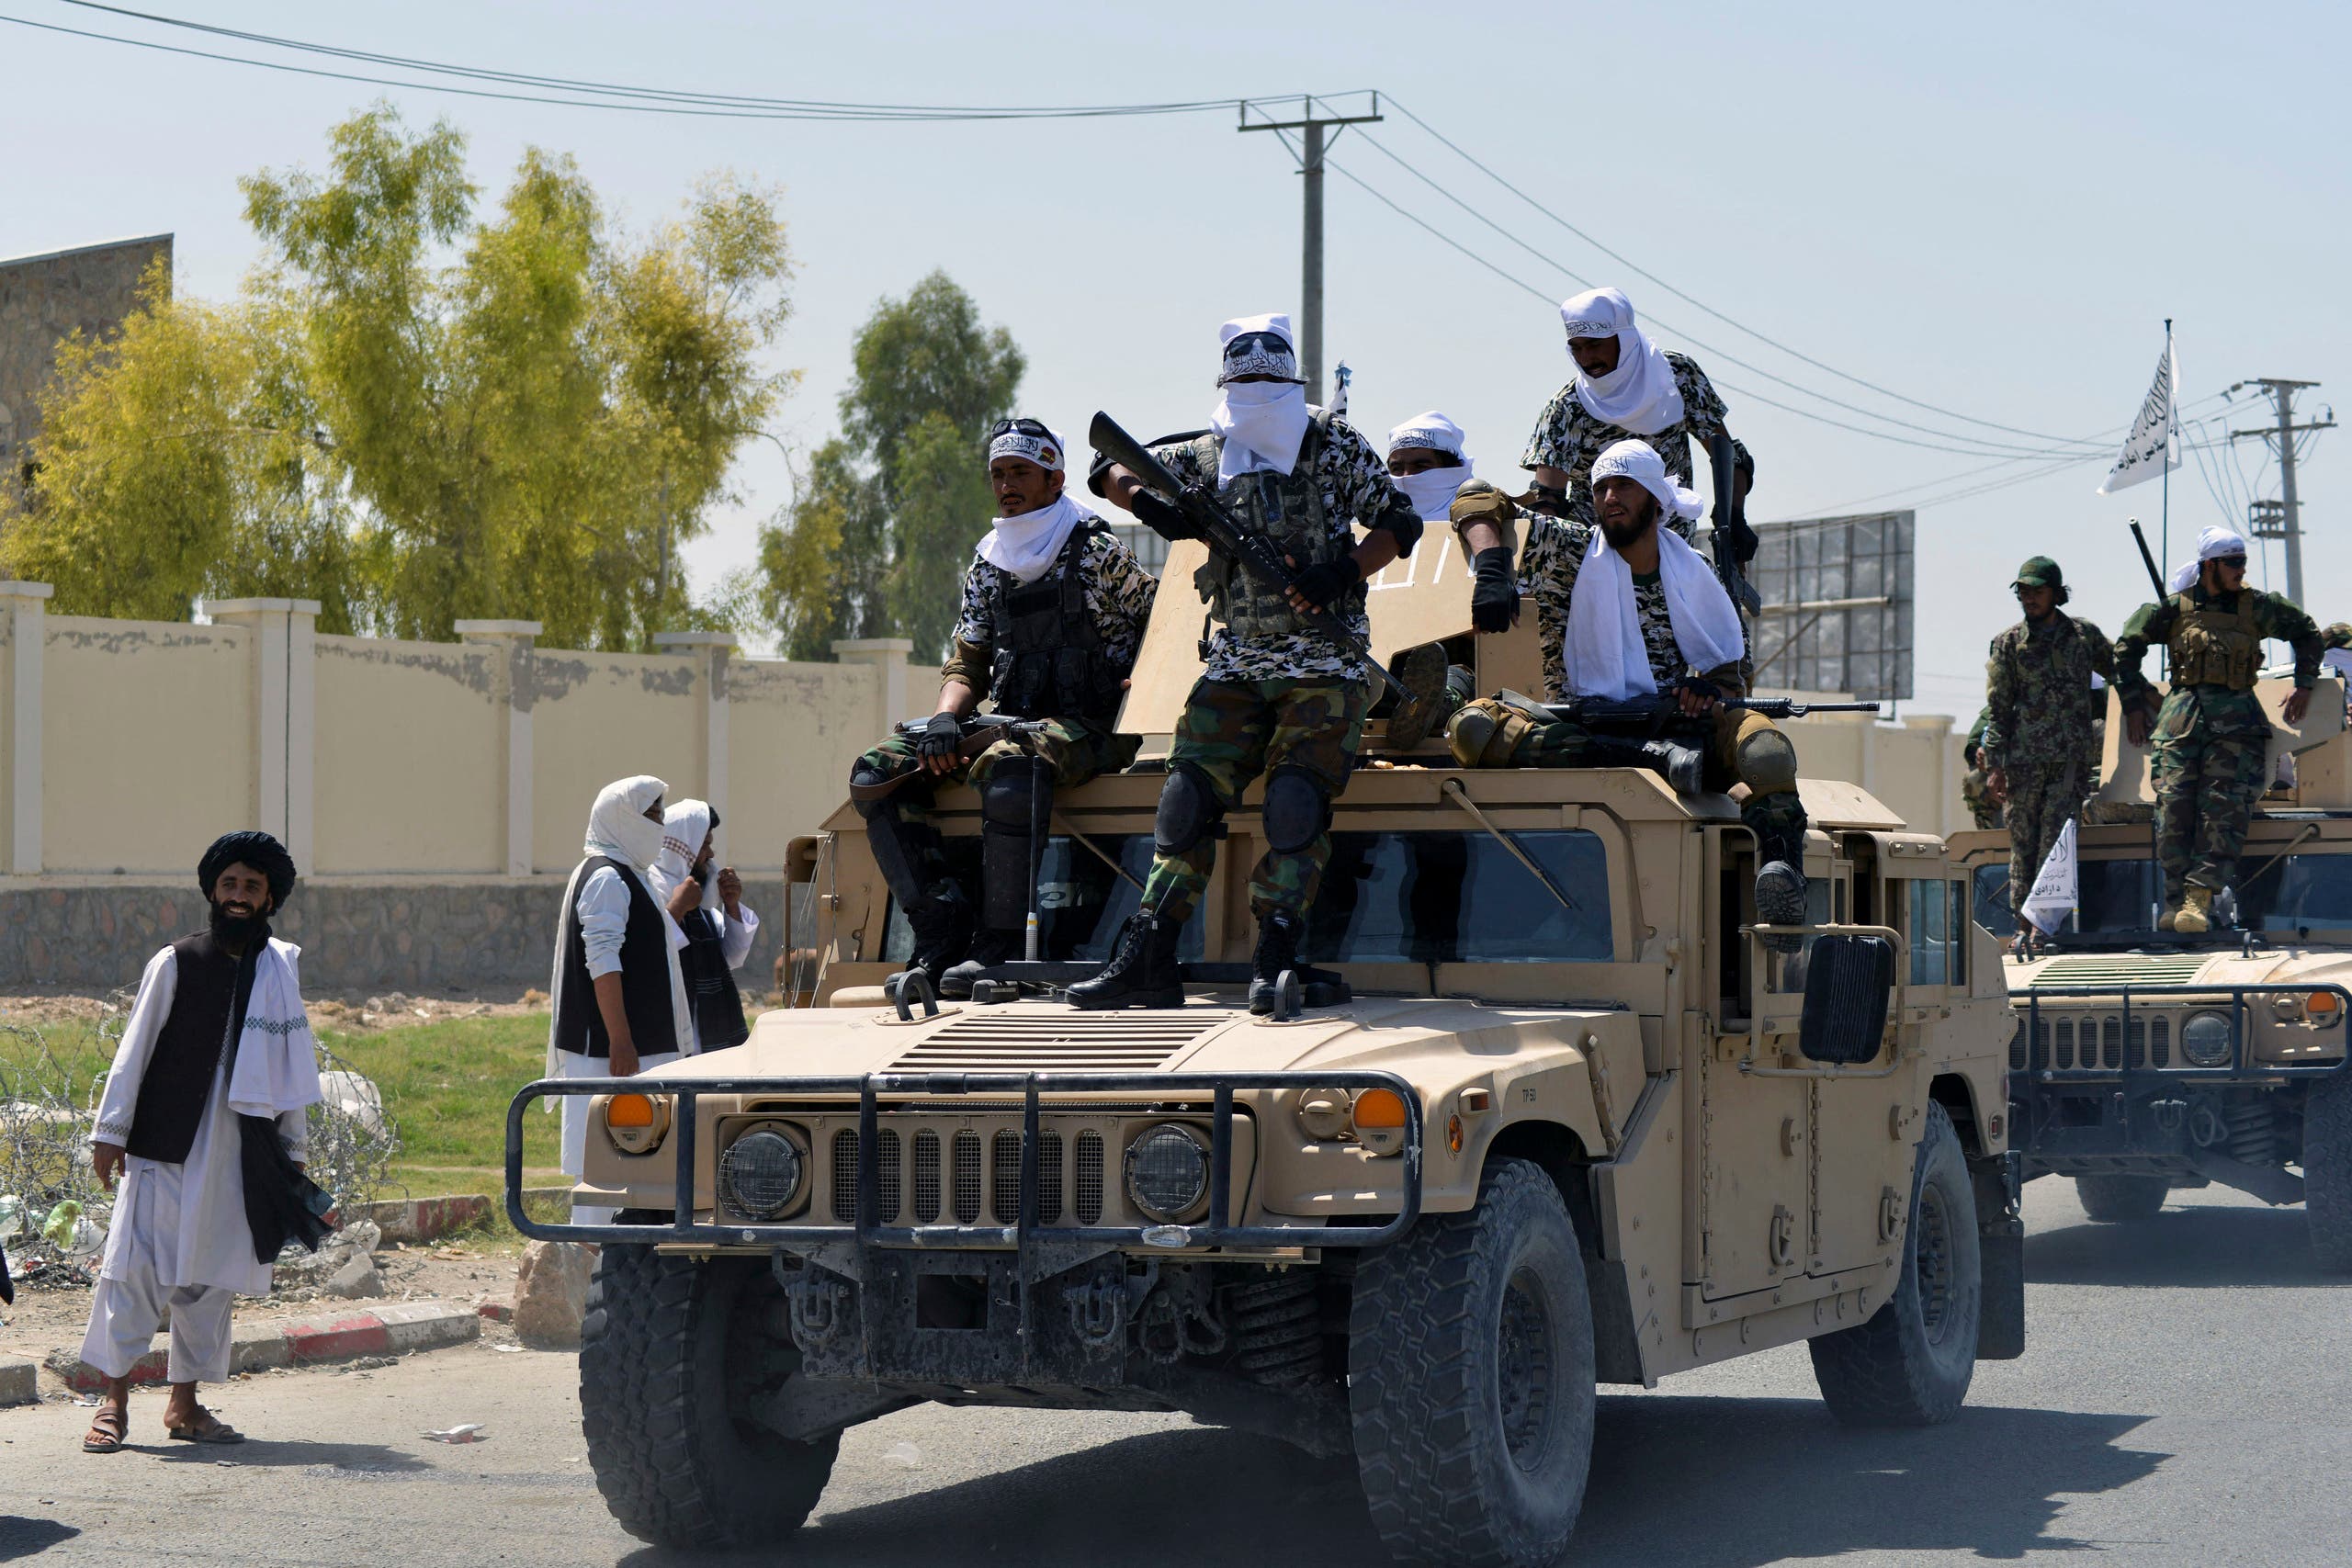 Taliban fighters stand on an armoured vehicle before parading along a road to celebrate after the US pulled all its troops out of Afghanistan, in Kandahar on September 1, 2021 following the Taliban’s military takeover of the country. (AFP)